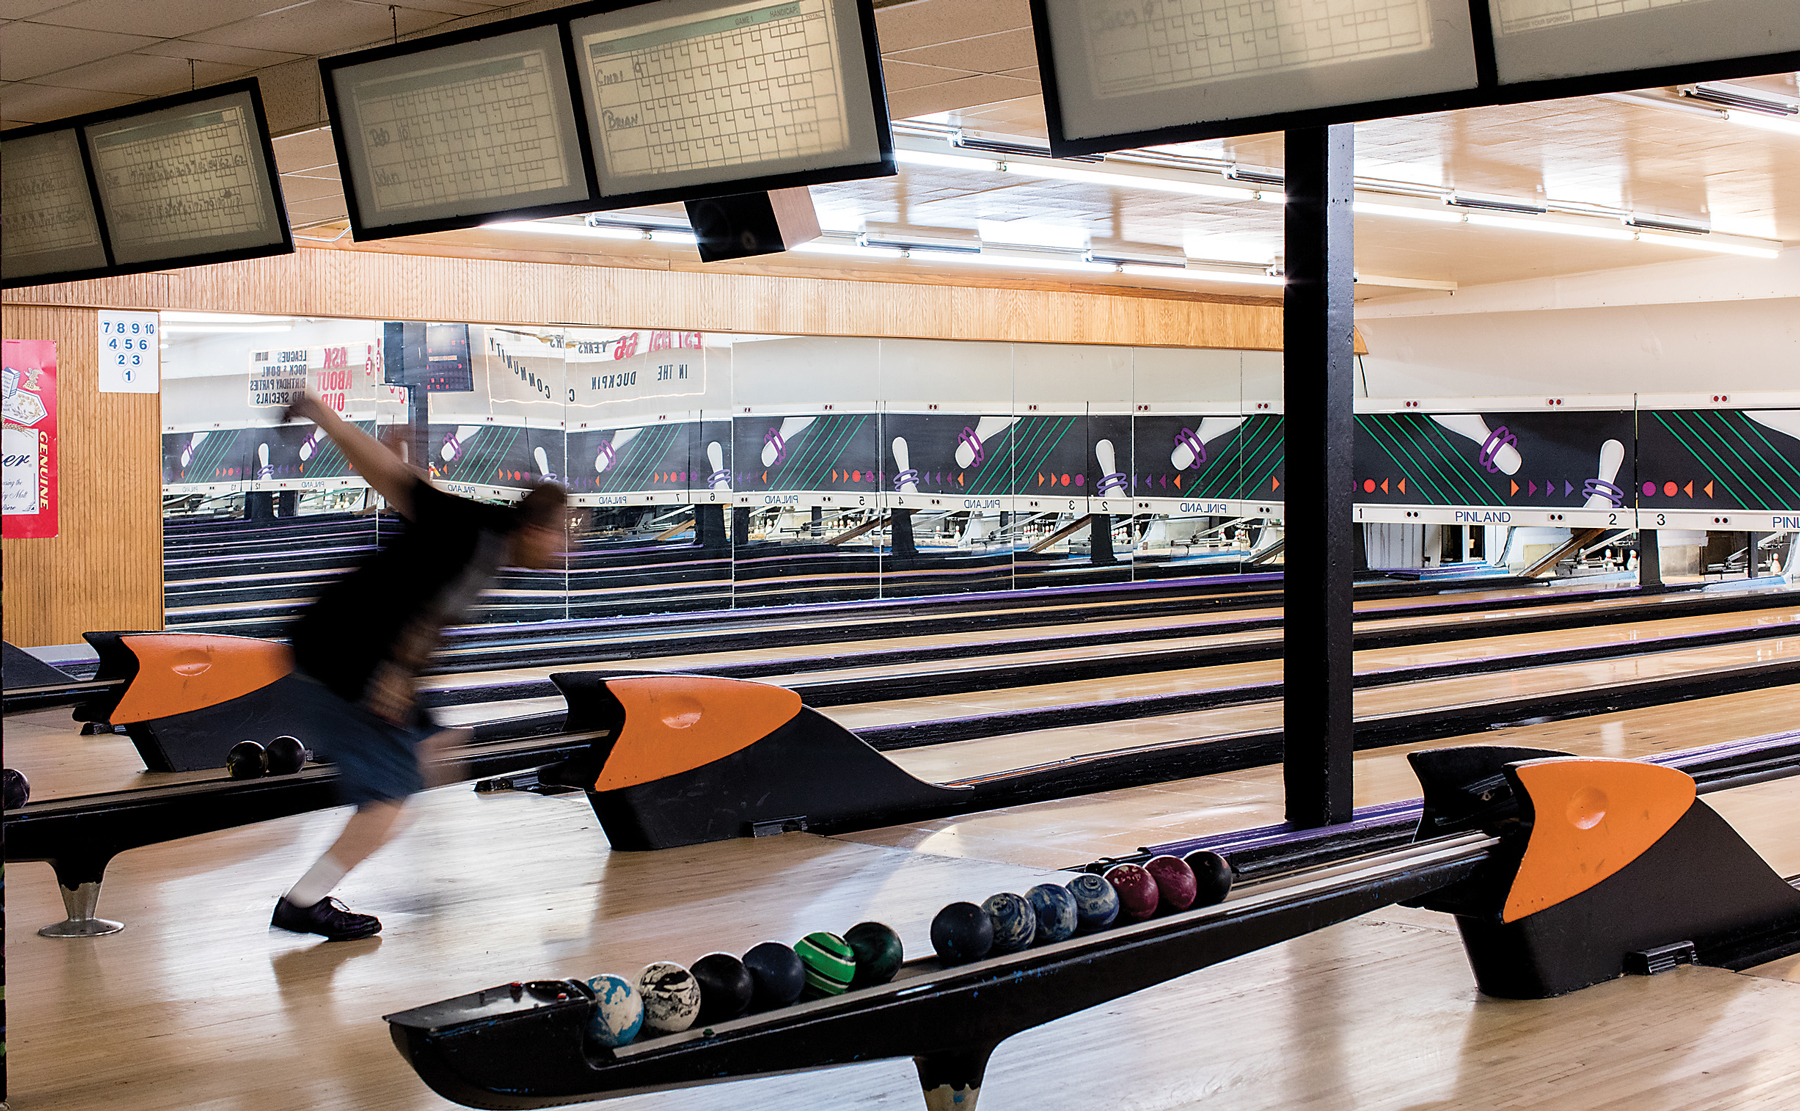 Toots, Duckpin Bowling and Memories of a Lost Baltimore - JMORE